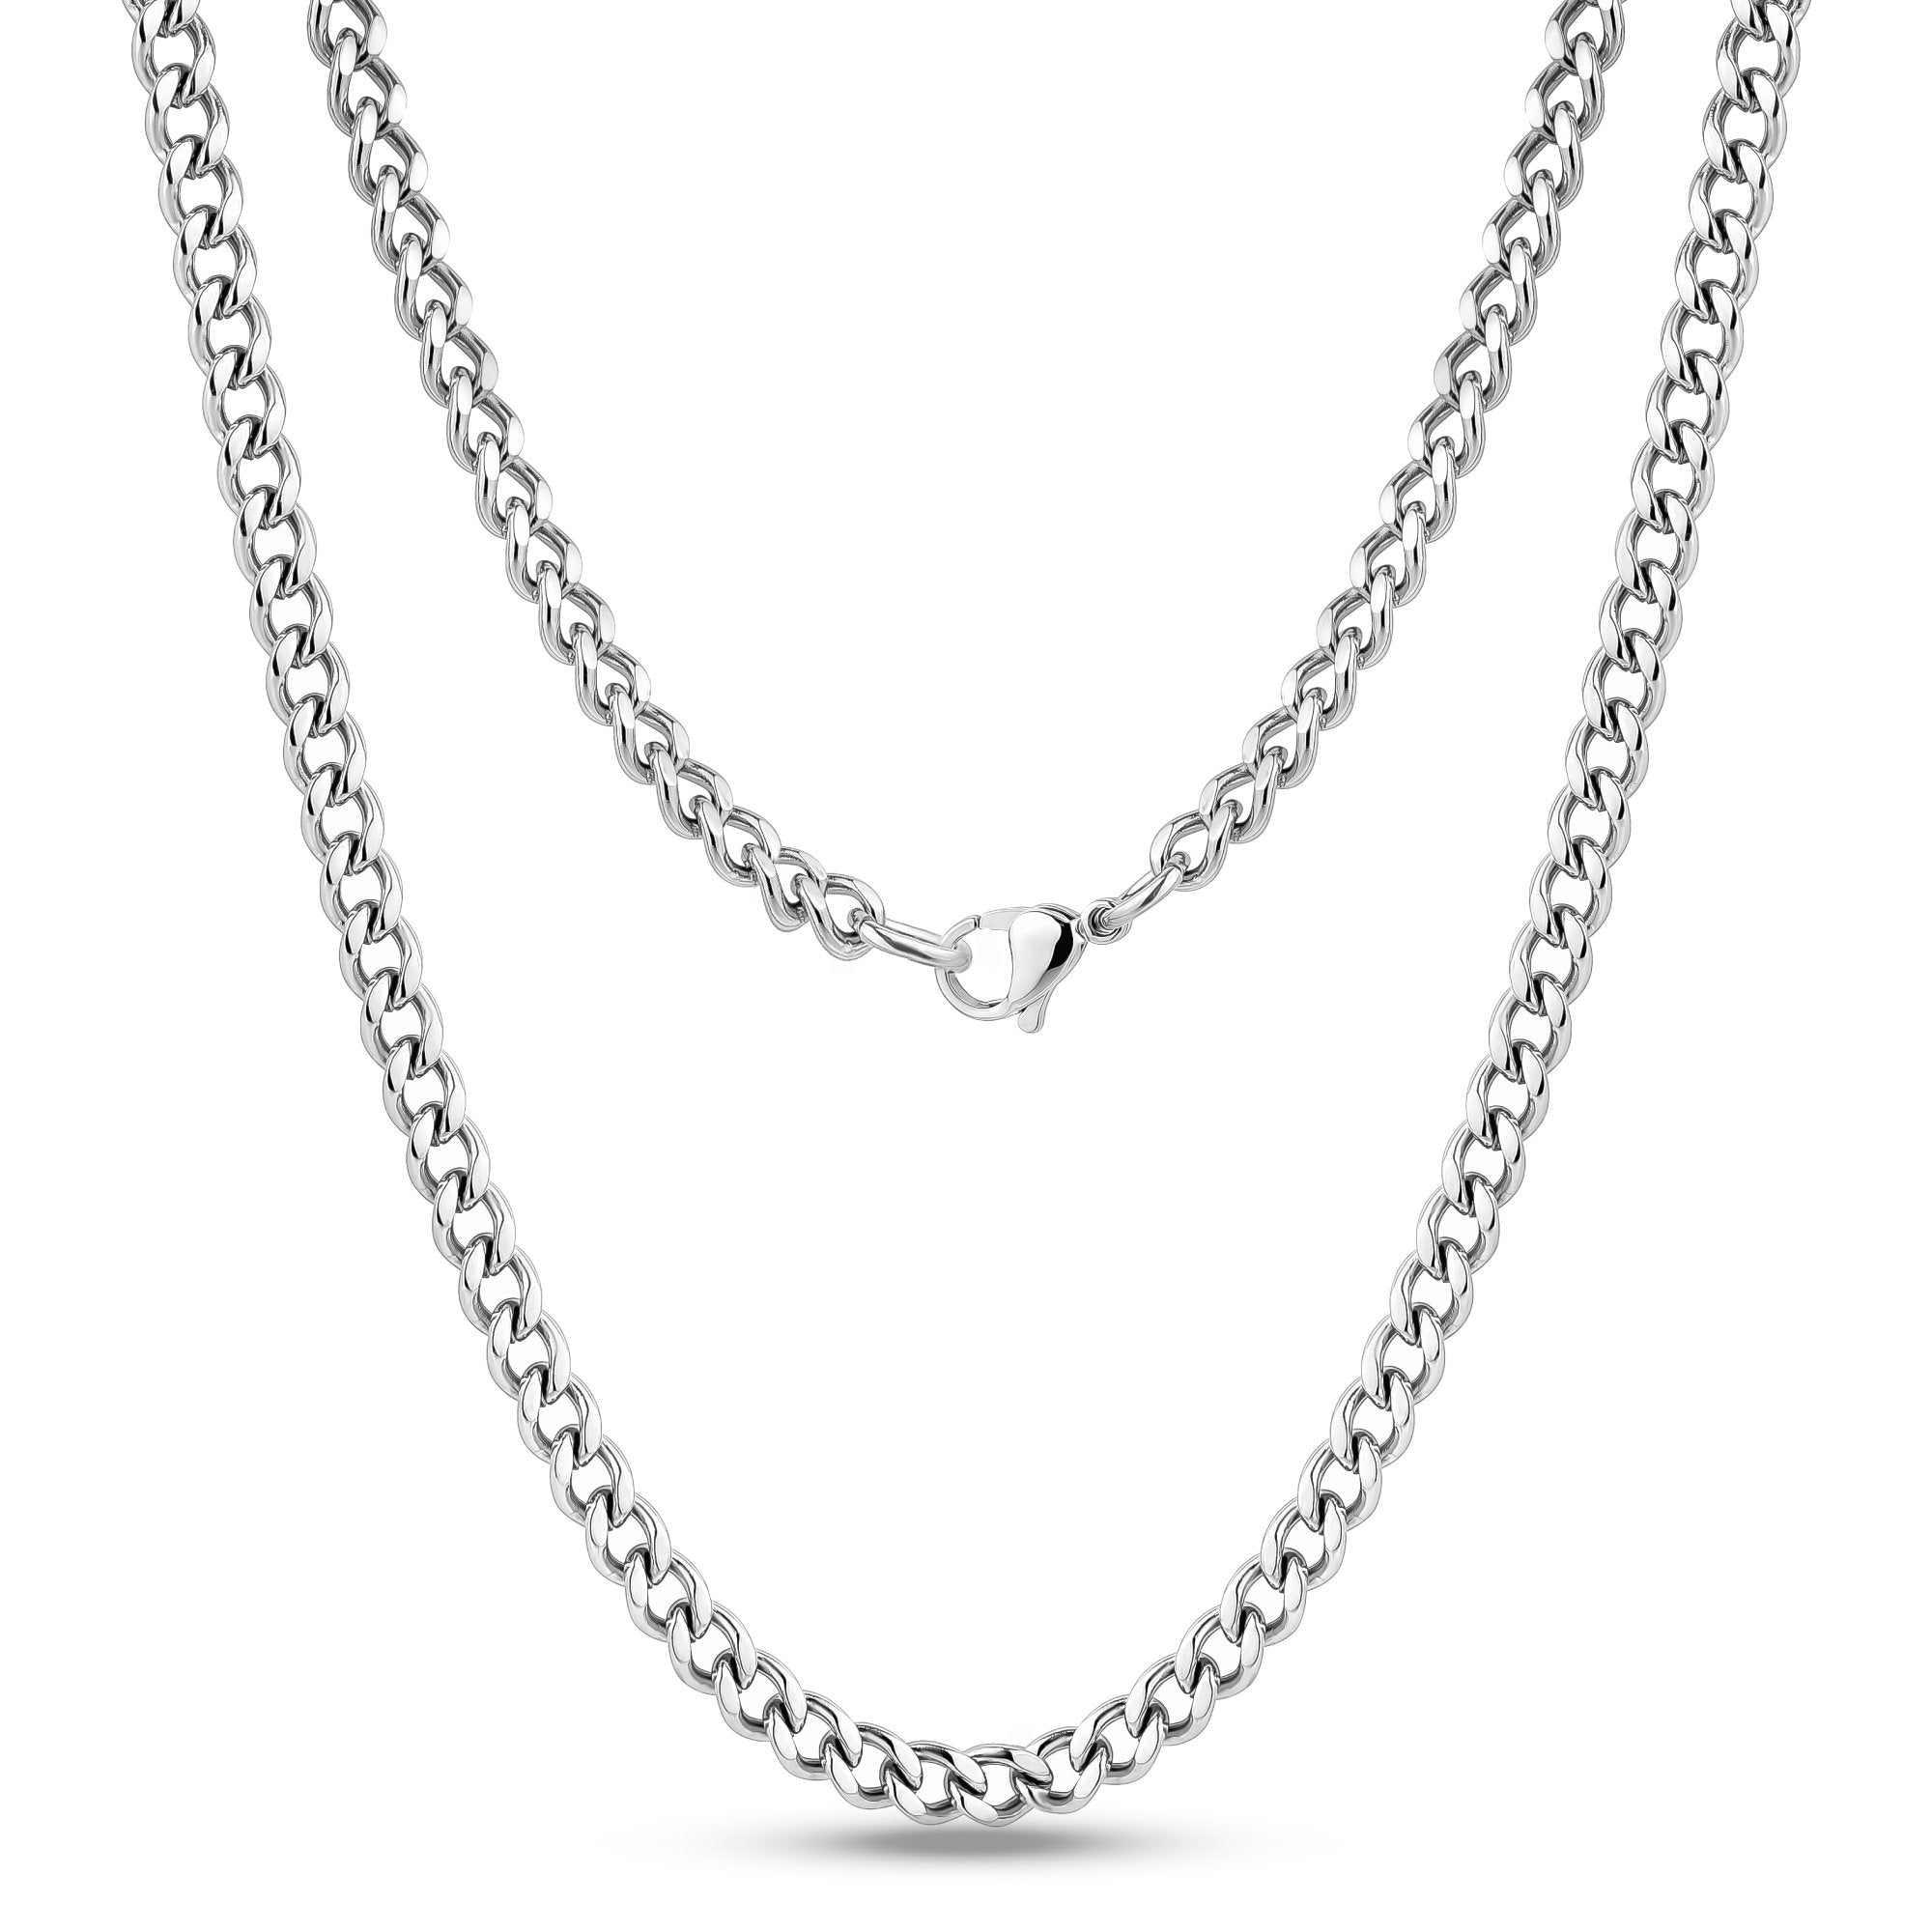 Men's Chain Necklace, Cuban Link Chain Necklace, Stainless Steel Silver  Chain, 7mm Cuban Chain Necklace for Men -  Canada